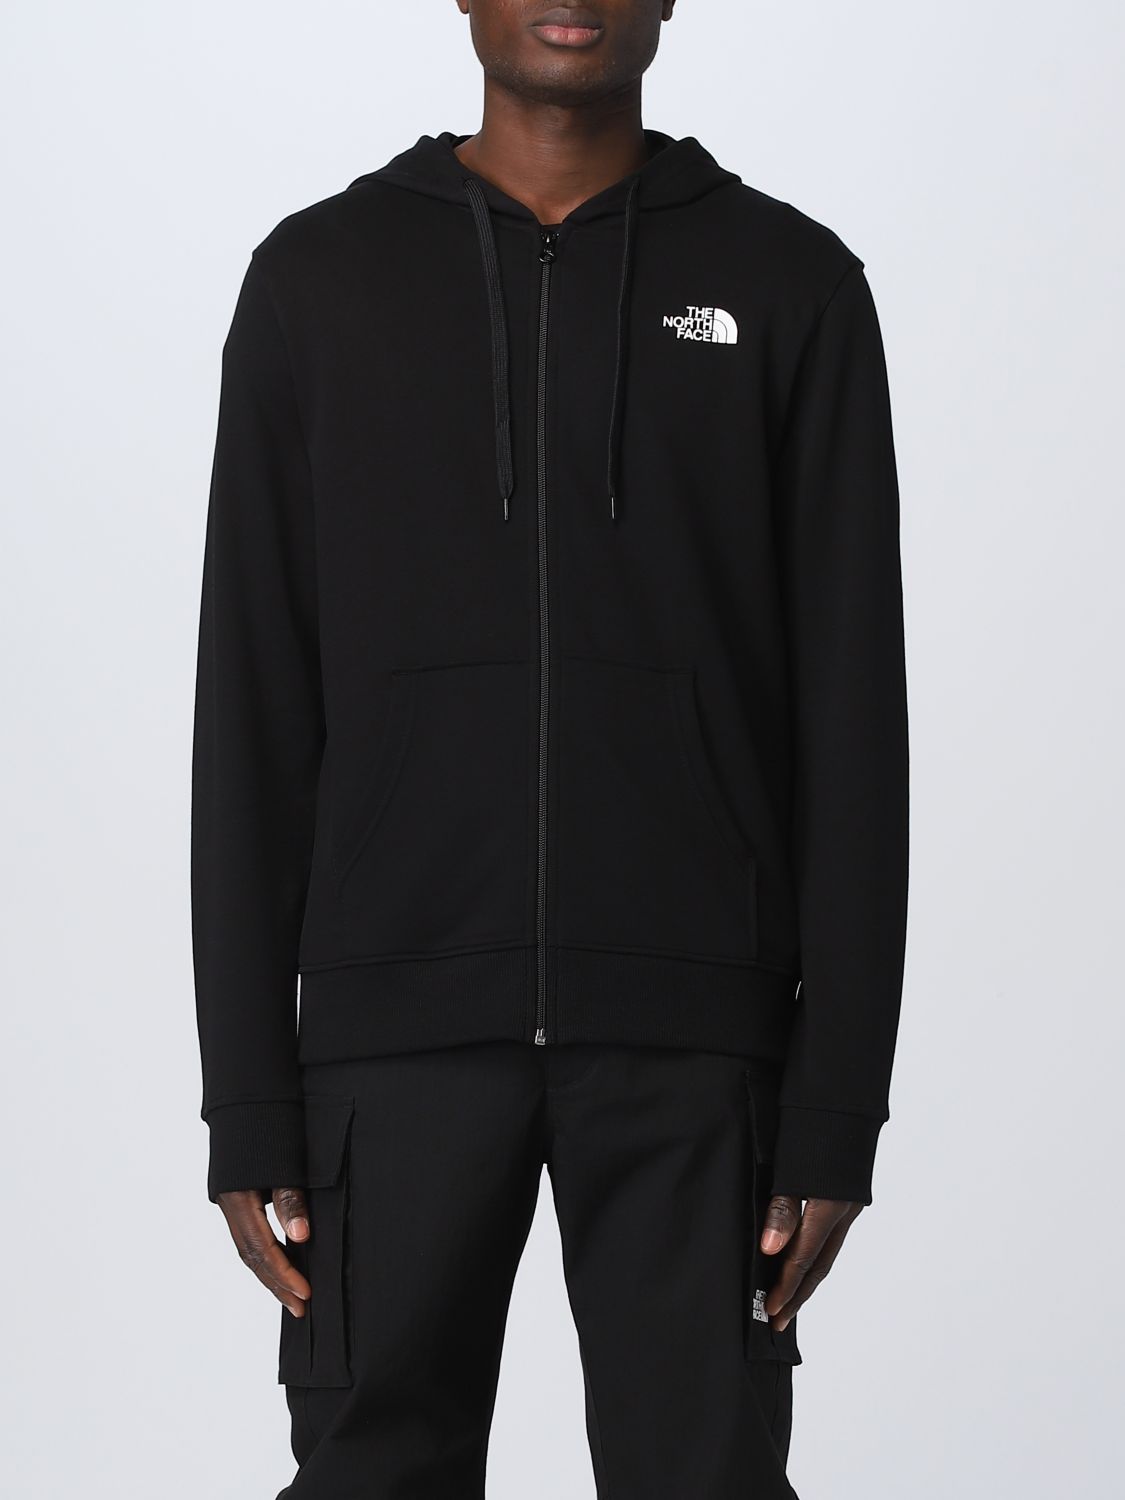 THE NORTH FACE: sweatshirt for man - Black | The North Face sweatshirt ...